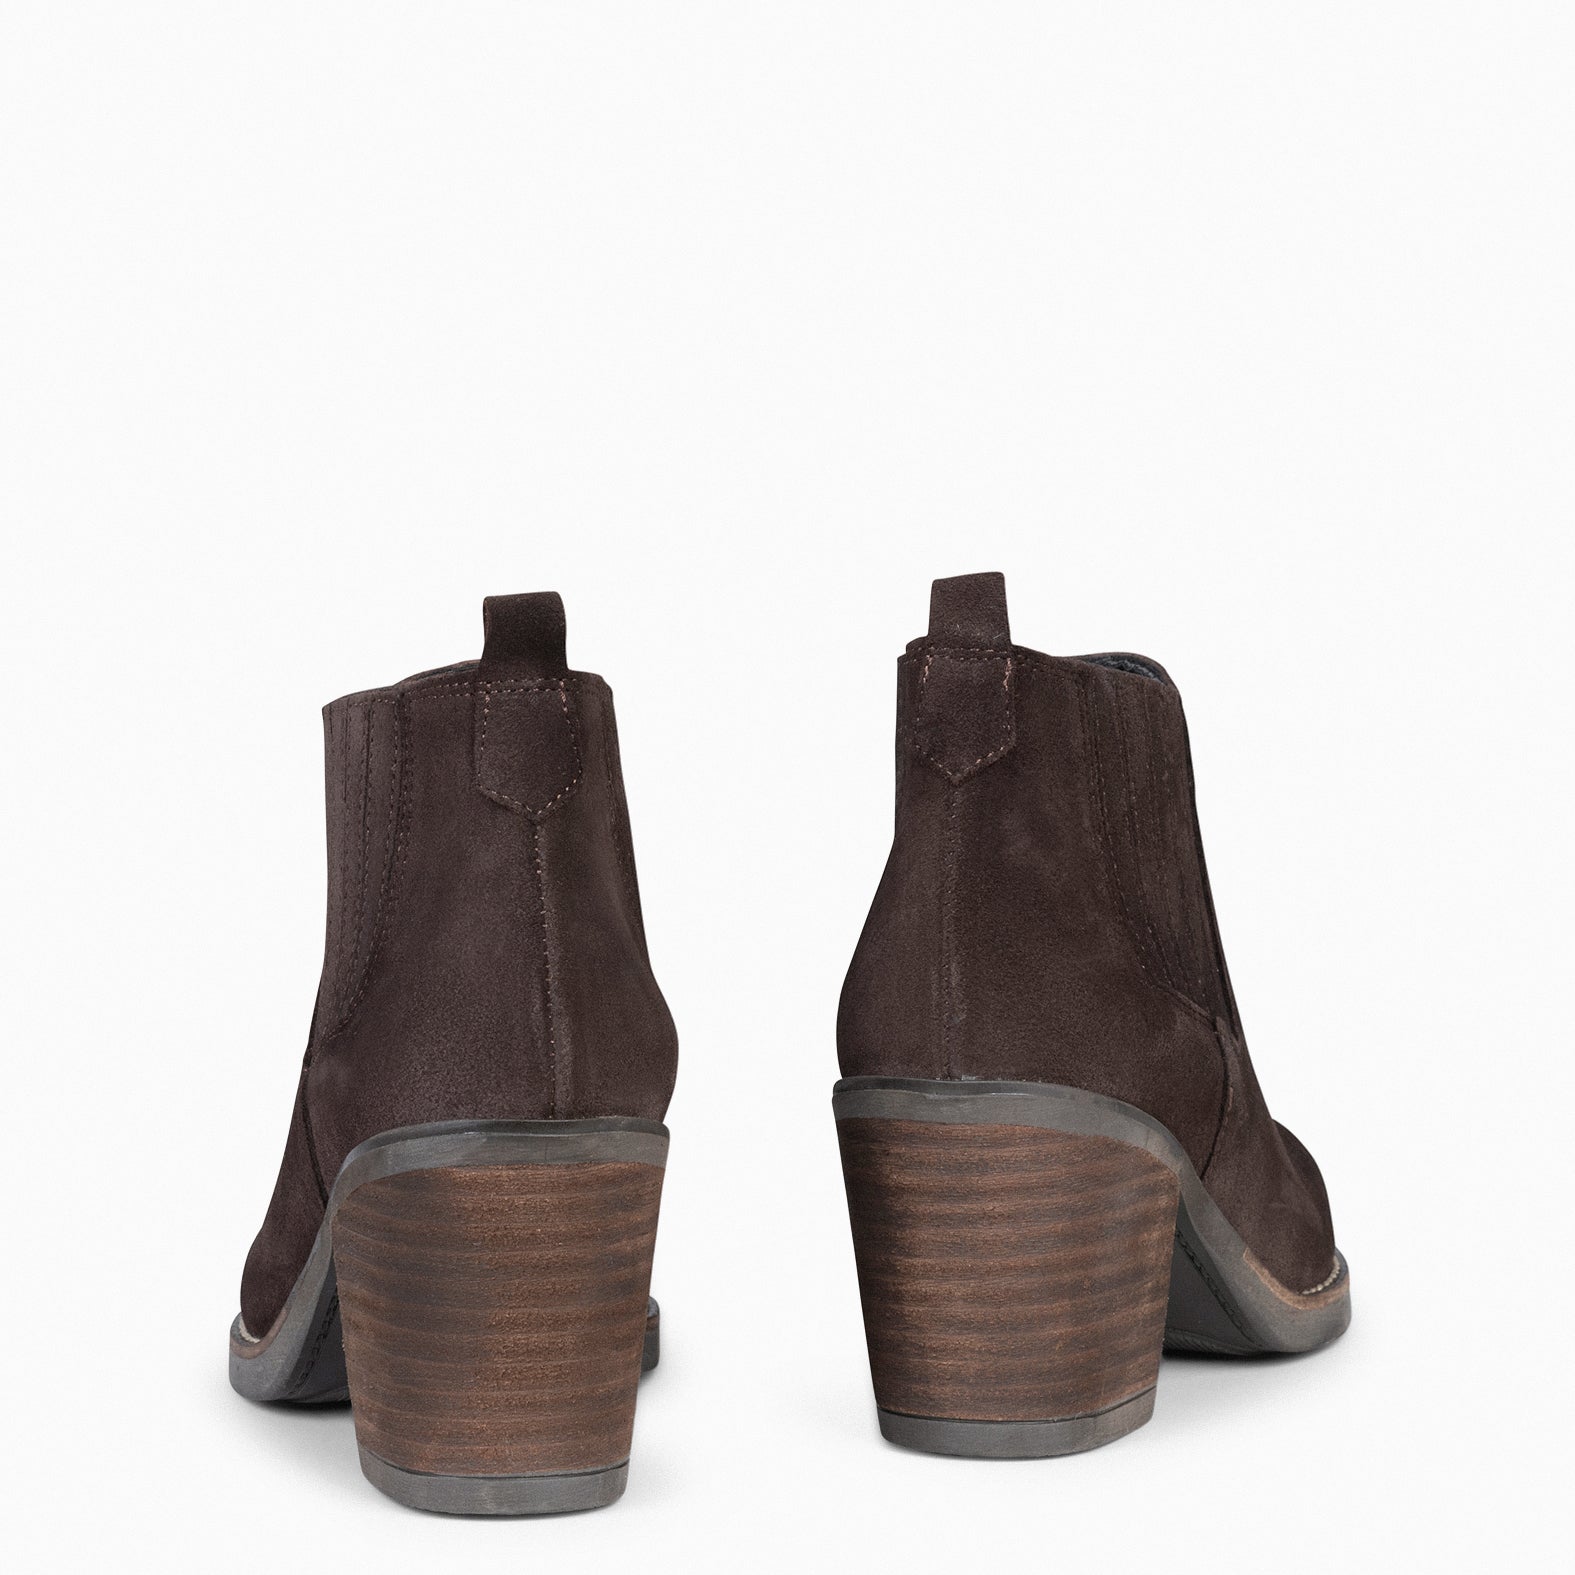 ALABAMA - BROWN Cowboy Boots for Women